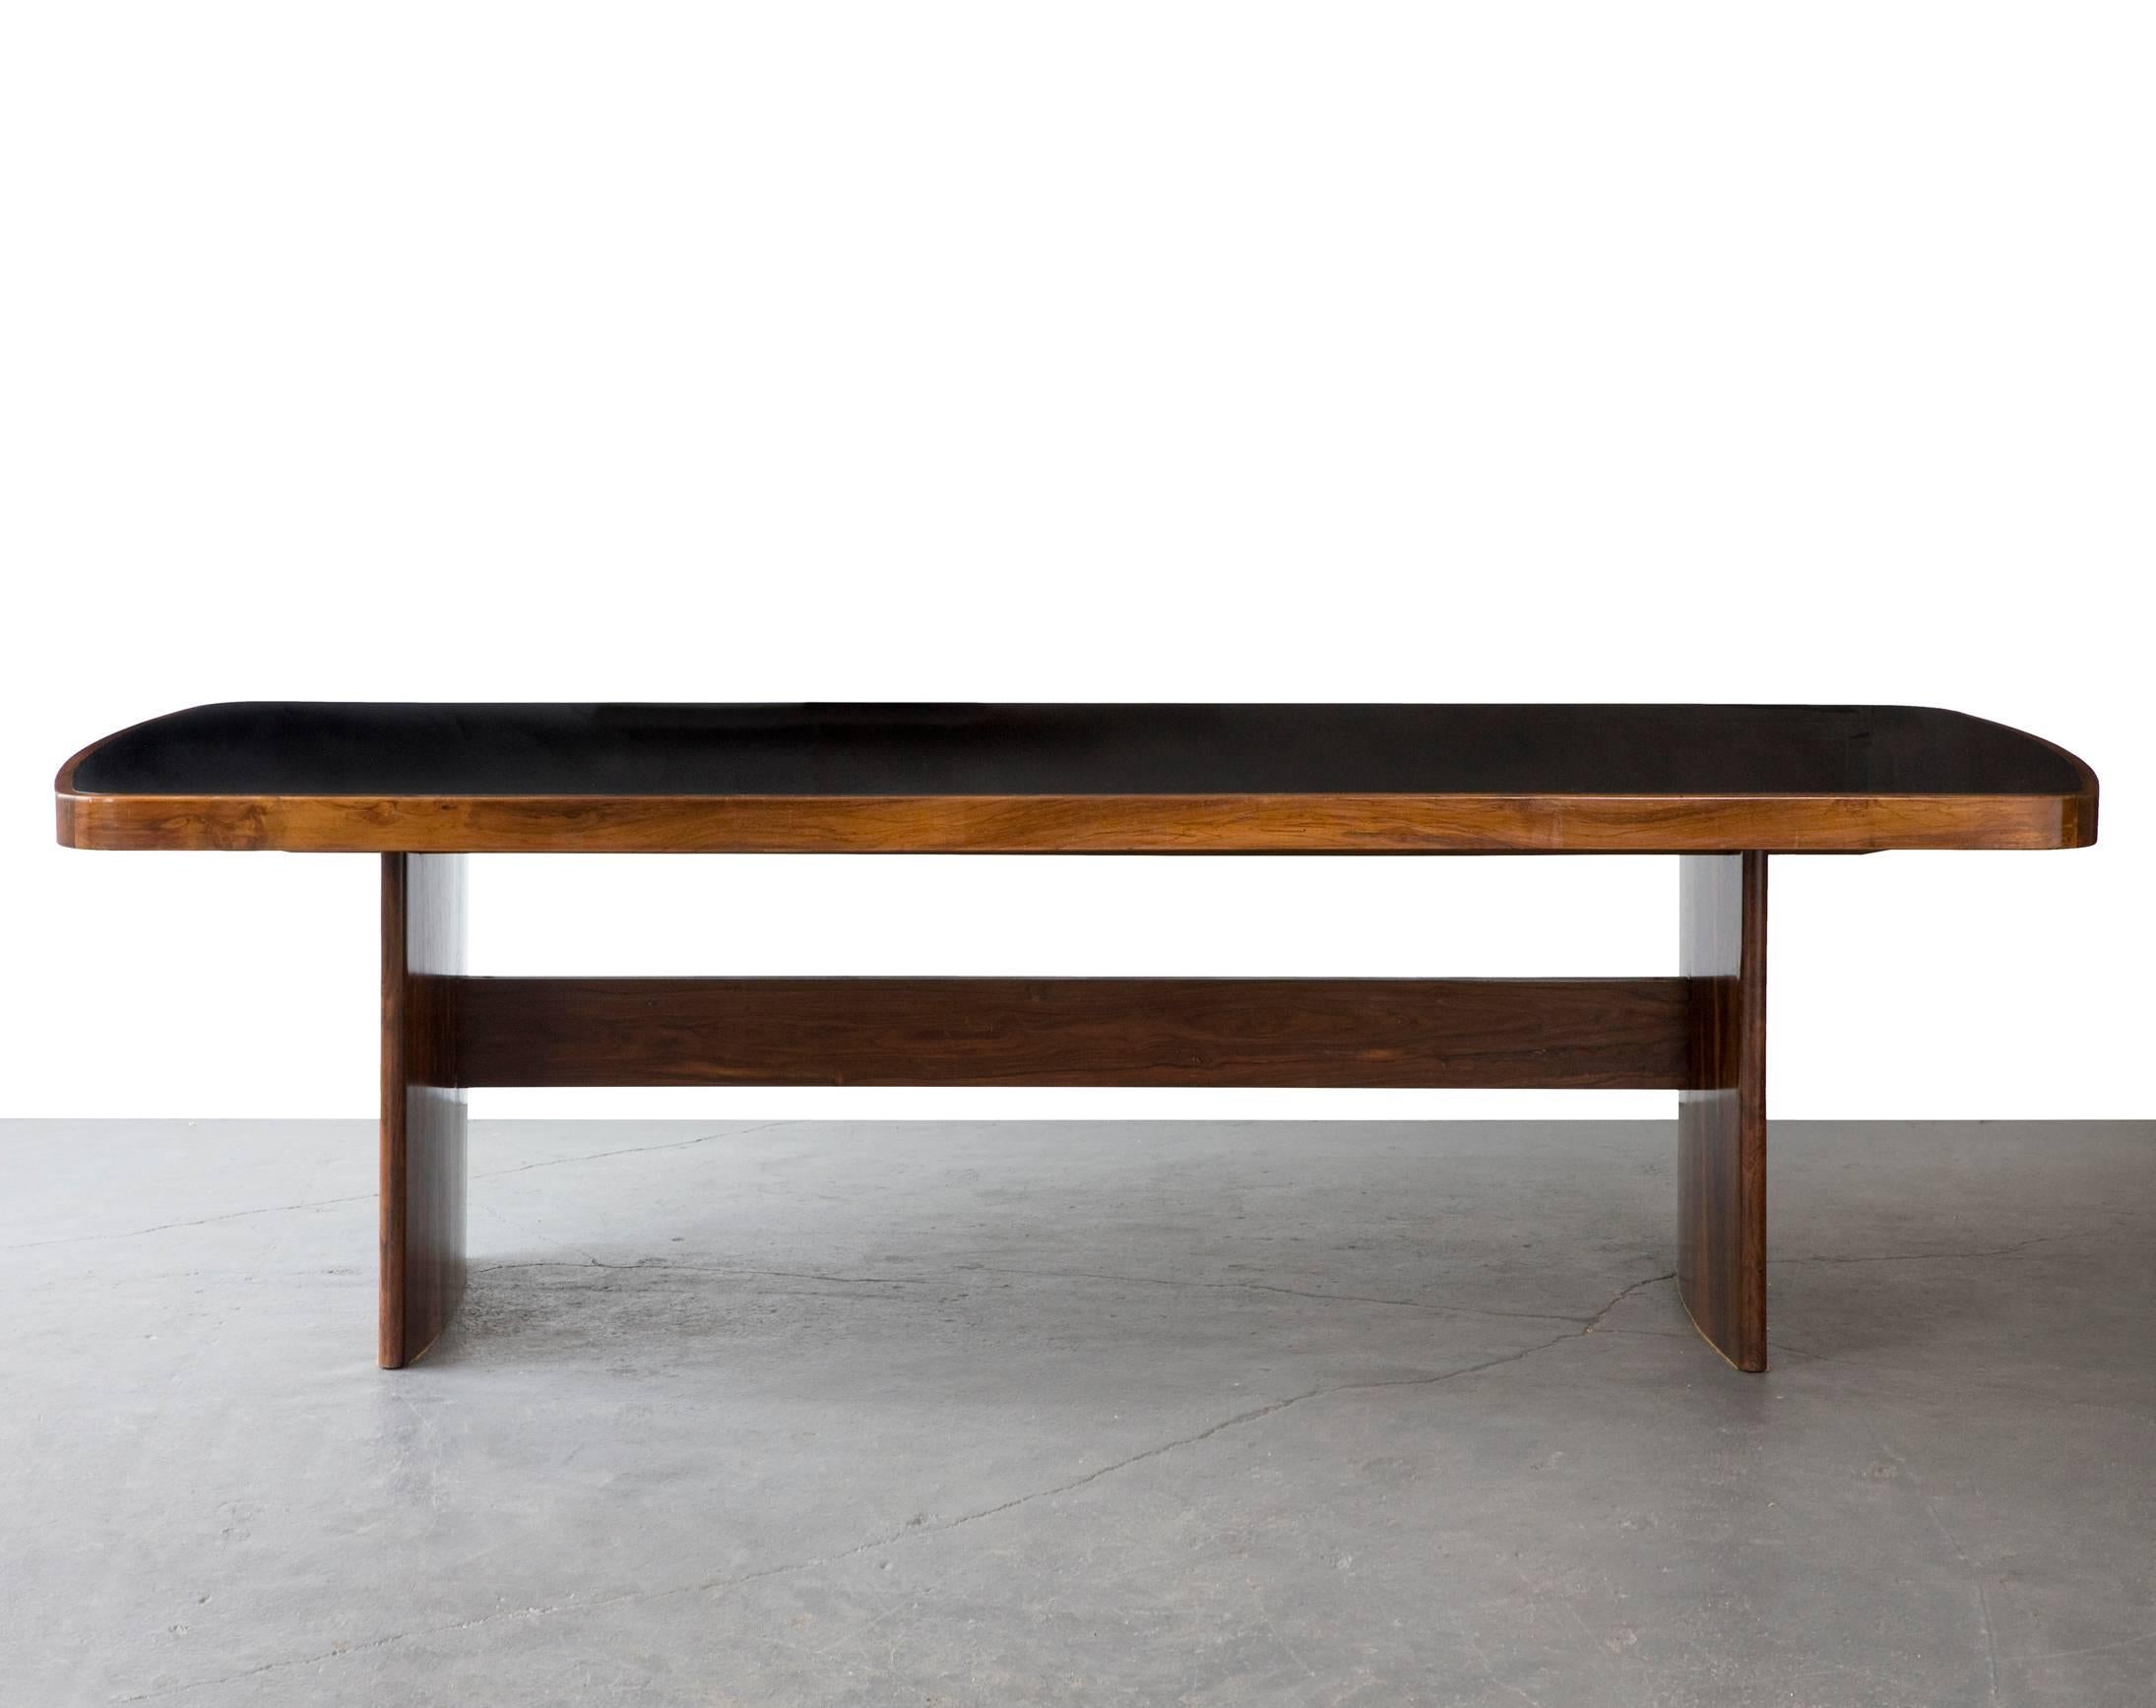 Soft-edged rectangular dining table in jacaranda with black under painted glass top and curved legs. Designed by Joaquim Tenreiro, Brazil, circa 1949.